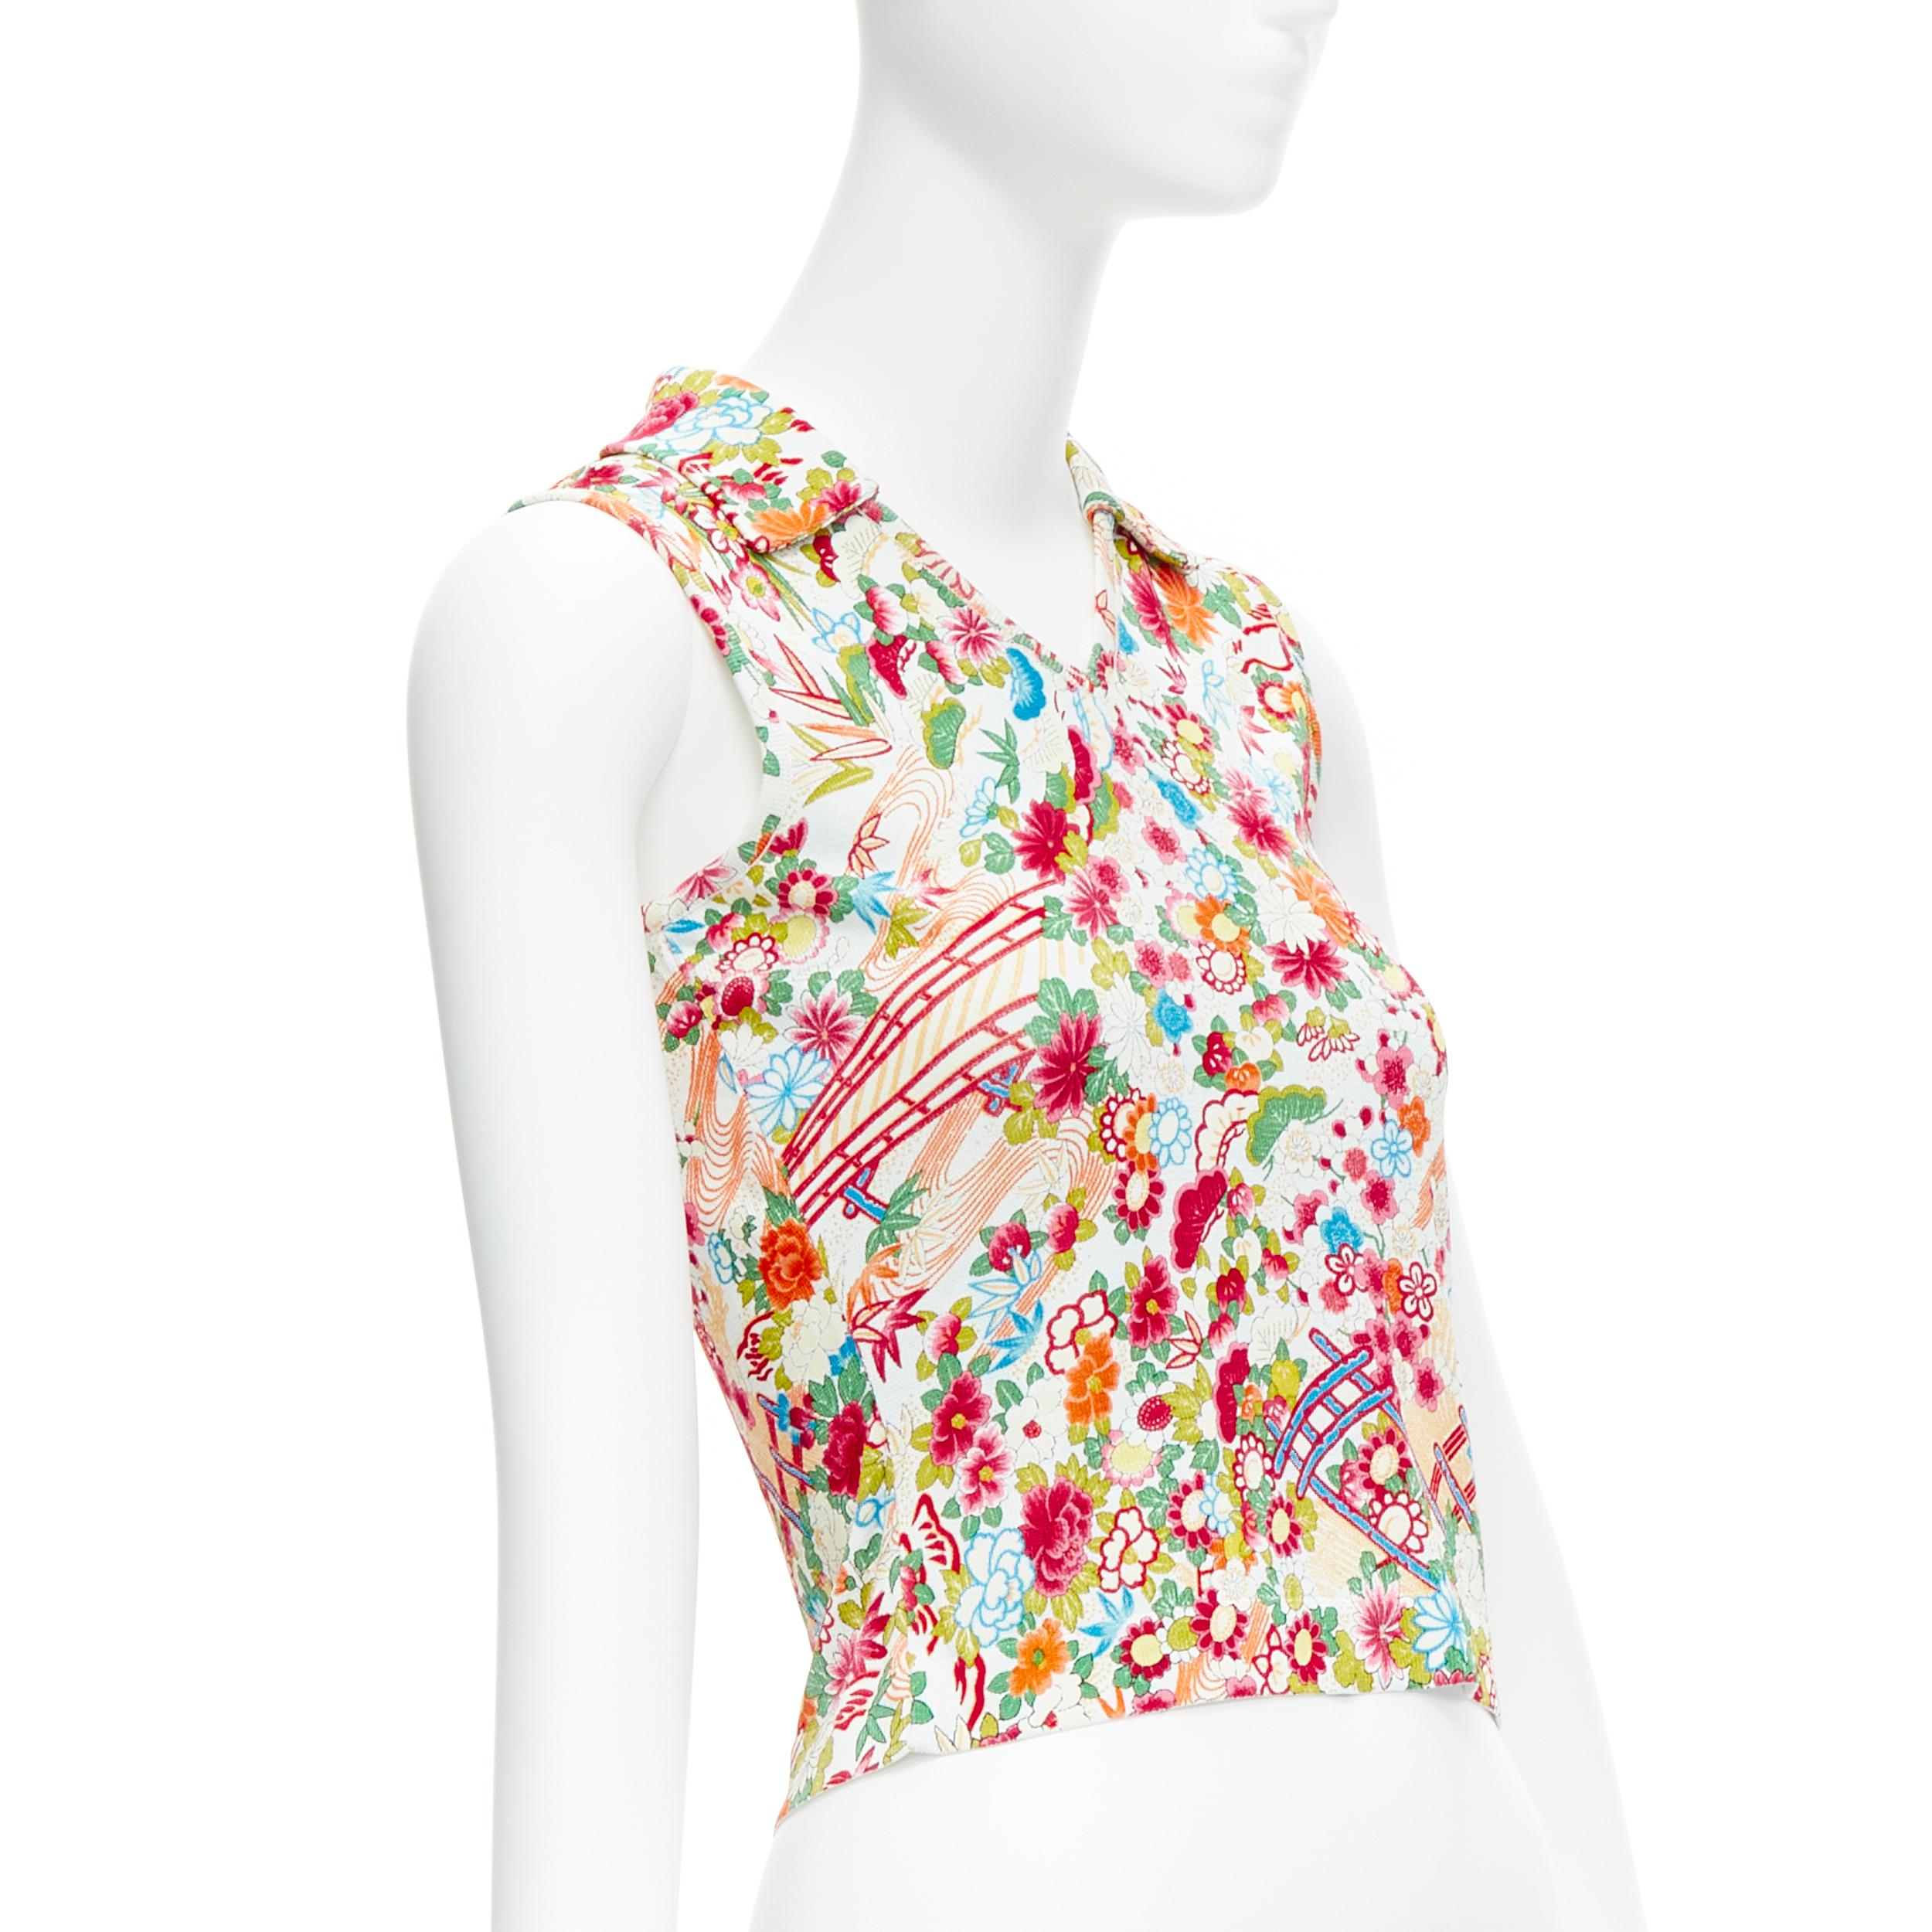 CHRISTIAN DIOR Galliano Vintage floral bridge print cropped top FR38 M
Reference: TGAS/C02022
Brand: Christian Dior
Designer: John Galliano
Material: Polyamide
Color: Multicolour
Pattern: Floral
Closure: Pullover
Made in: